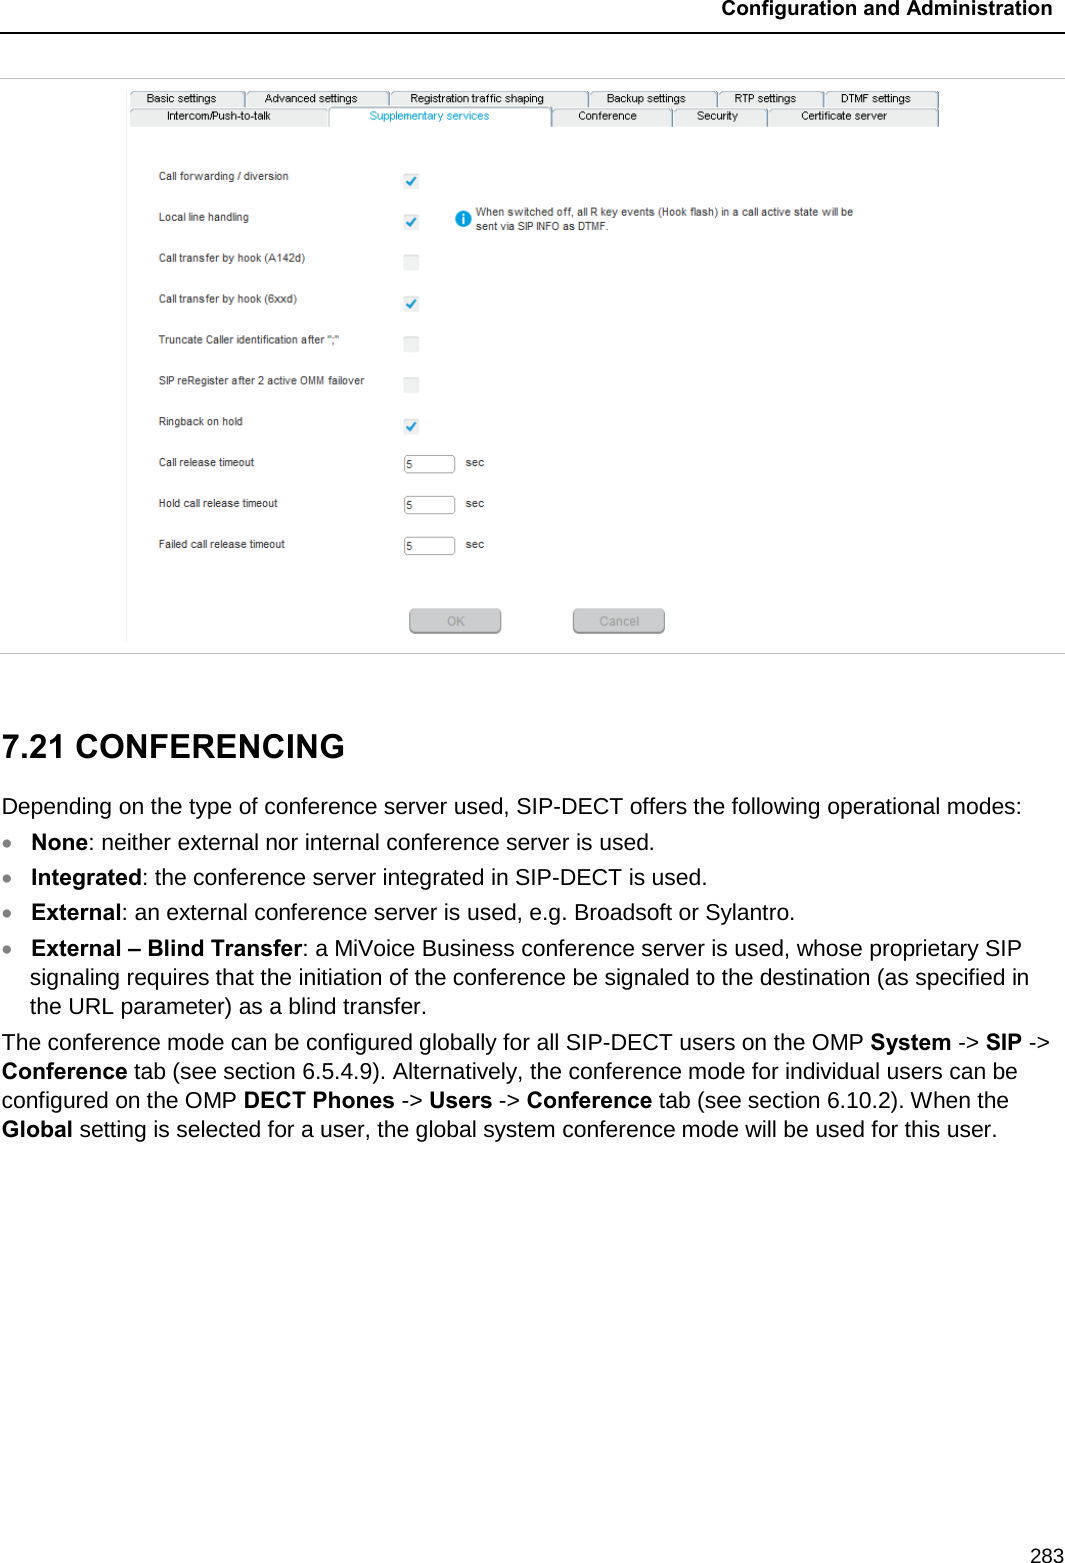  Configuration and Administration  283   7.21 CONFERENCING  Depending on the type of conference server used, SIP-DECT offers the following operational modes: • None: neither external nor internal conference server is used. • Integrated: the conference server integrated in SIP-DECT is used. • External: an external conference server is used, e.g. Broadsoft or Sylantro. • External – Blind Transfer: a MiVoice Business conference server is used, whose proprietary SIP signaling requires that the initiation of the conference be signaled to the destination (as specified in the URL parameter) as a blind transfer. The conference mode can be configured globally for all SIP-DECT users on the OMP System -&gt; SIP -&gt; Conference tab (see section 6.5.4.9). Alternatively, the conference mode for individual users can be configured on the OMP DECT Phones -&gt; Users -&gt; Conference tab (see section 6.10.2). When the Global setting is selected for a user, the global system conference mode will be used for this user. 